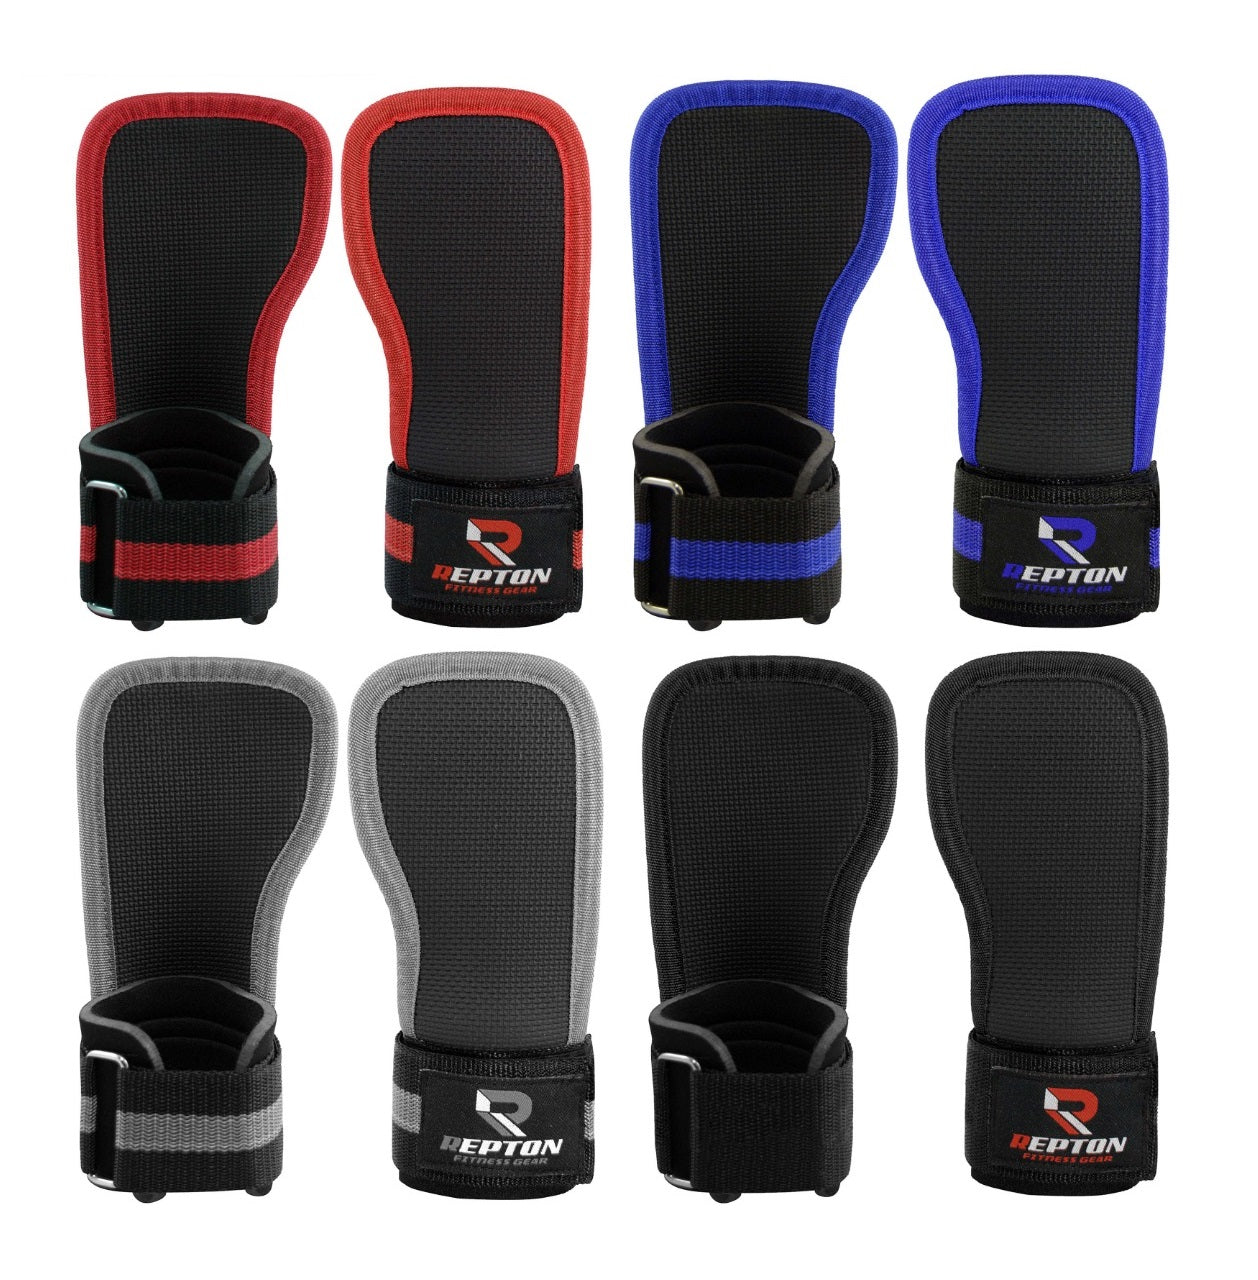 Weight Lifting Gym Palm Gel Pad Hand Grips Wrist Support Straps Training Gloves Repton Fitness Gear